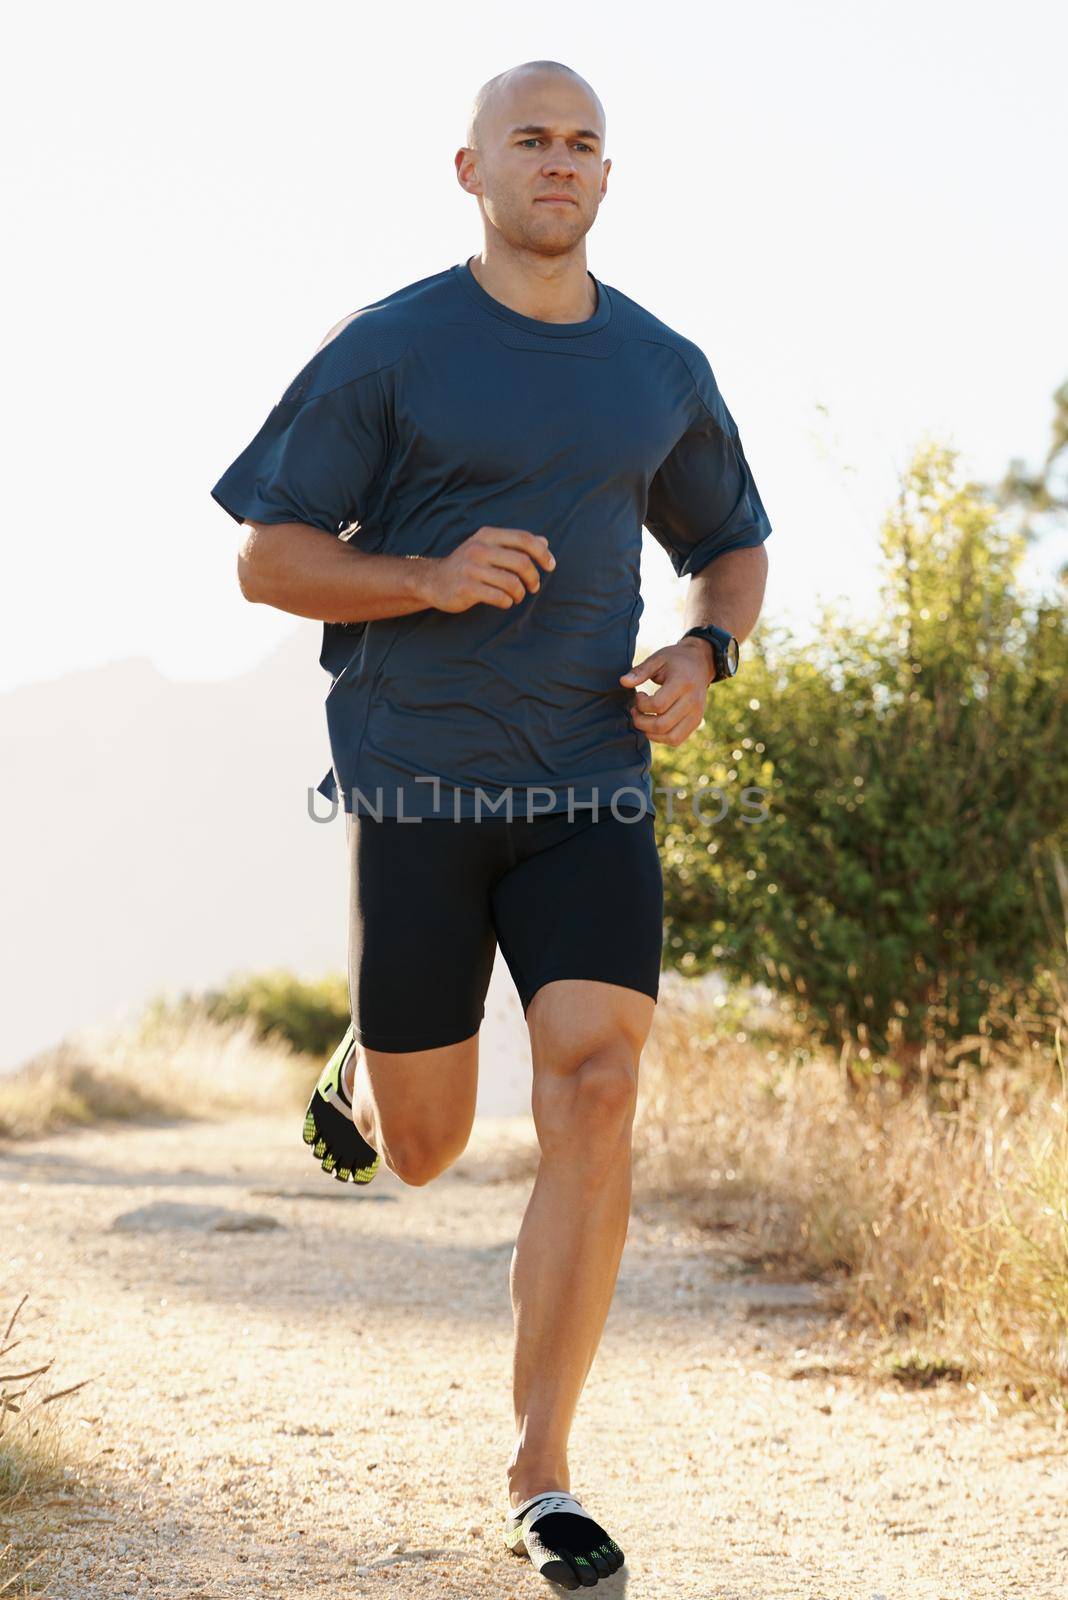 Pumped up for fitness. a young runner training outdoors